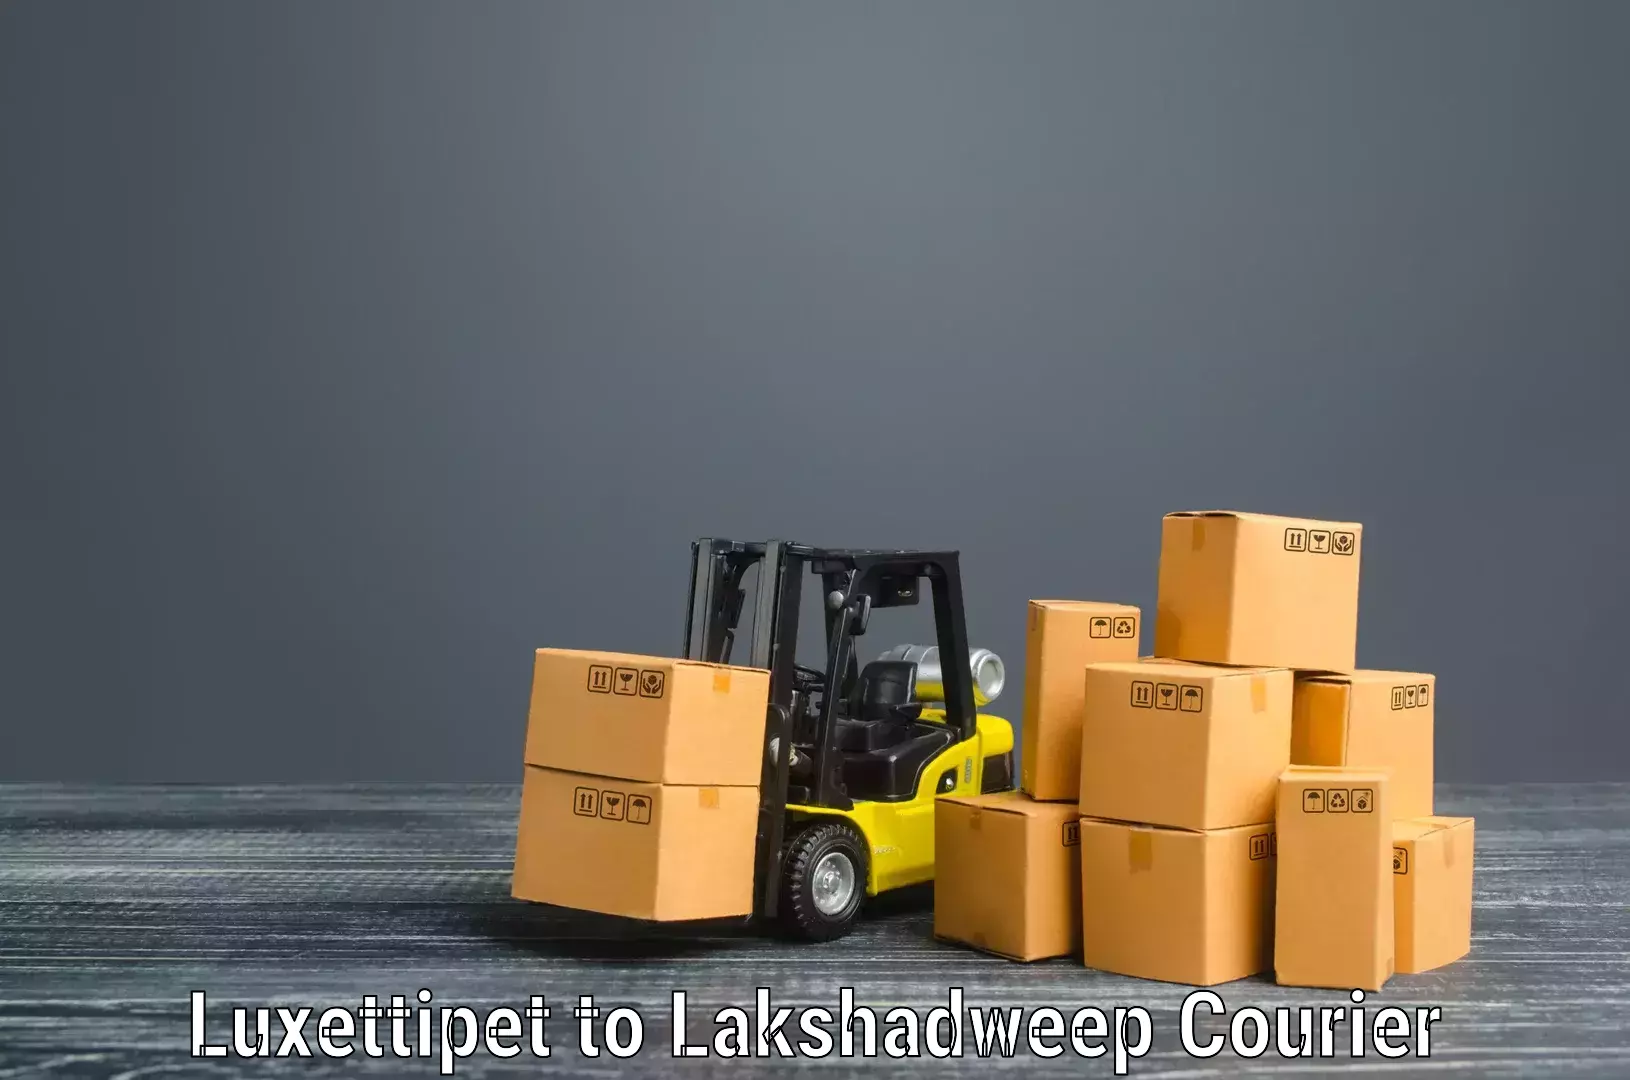 Home goods moving company Luxettipet to Lakshadweep